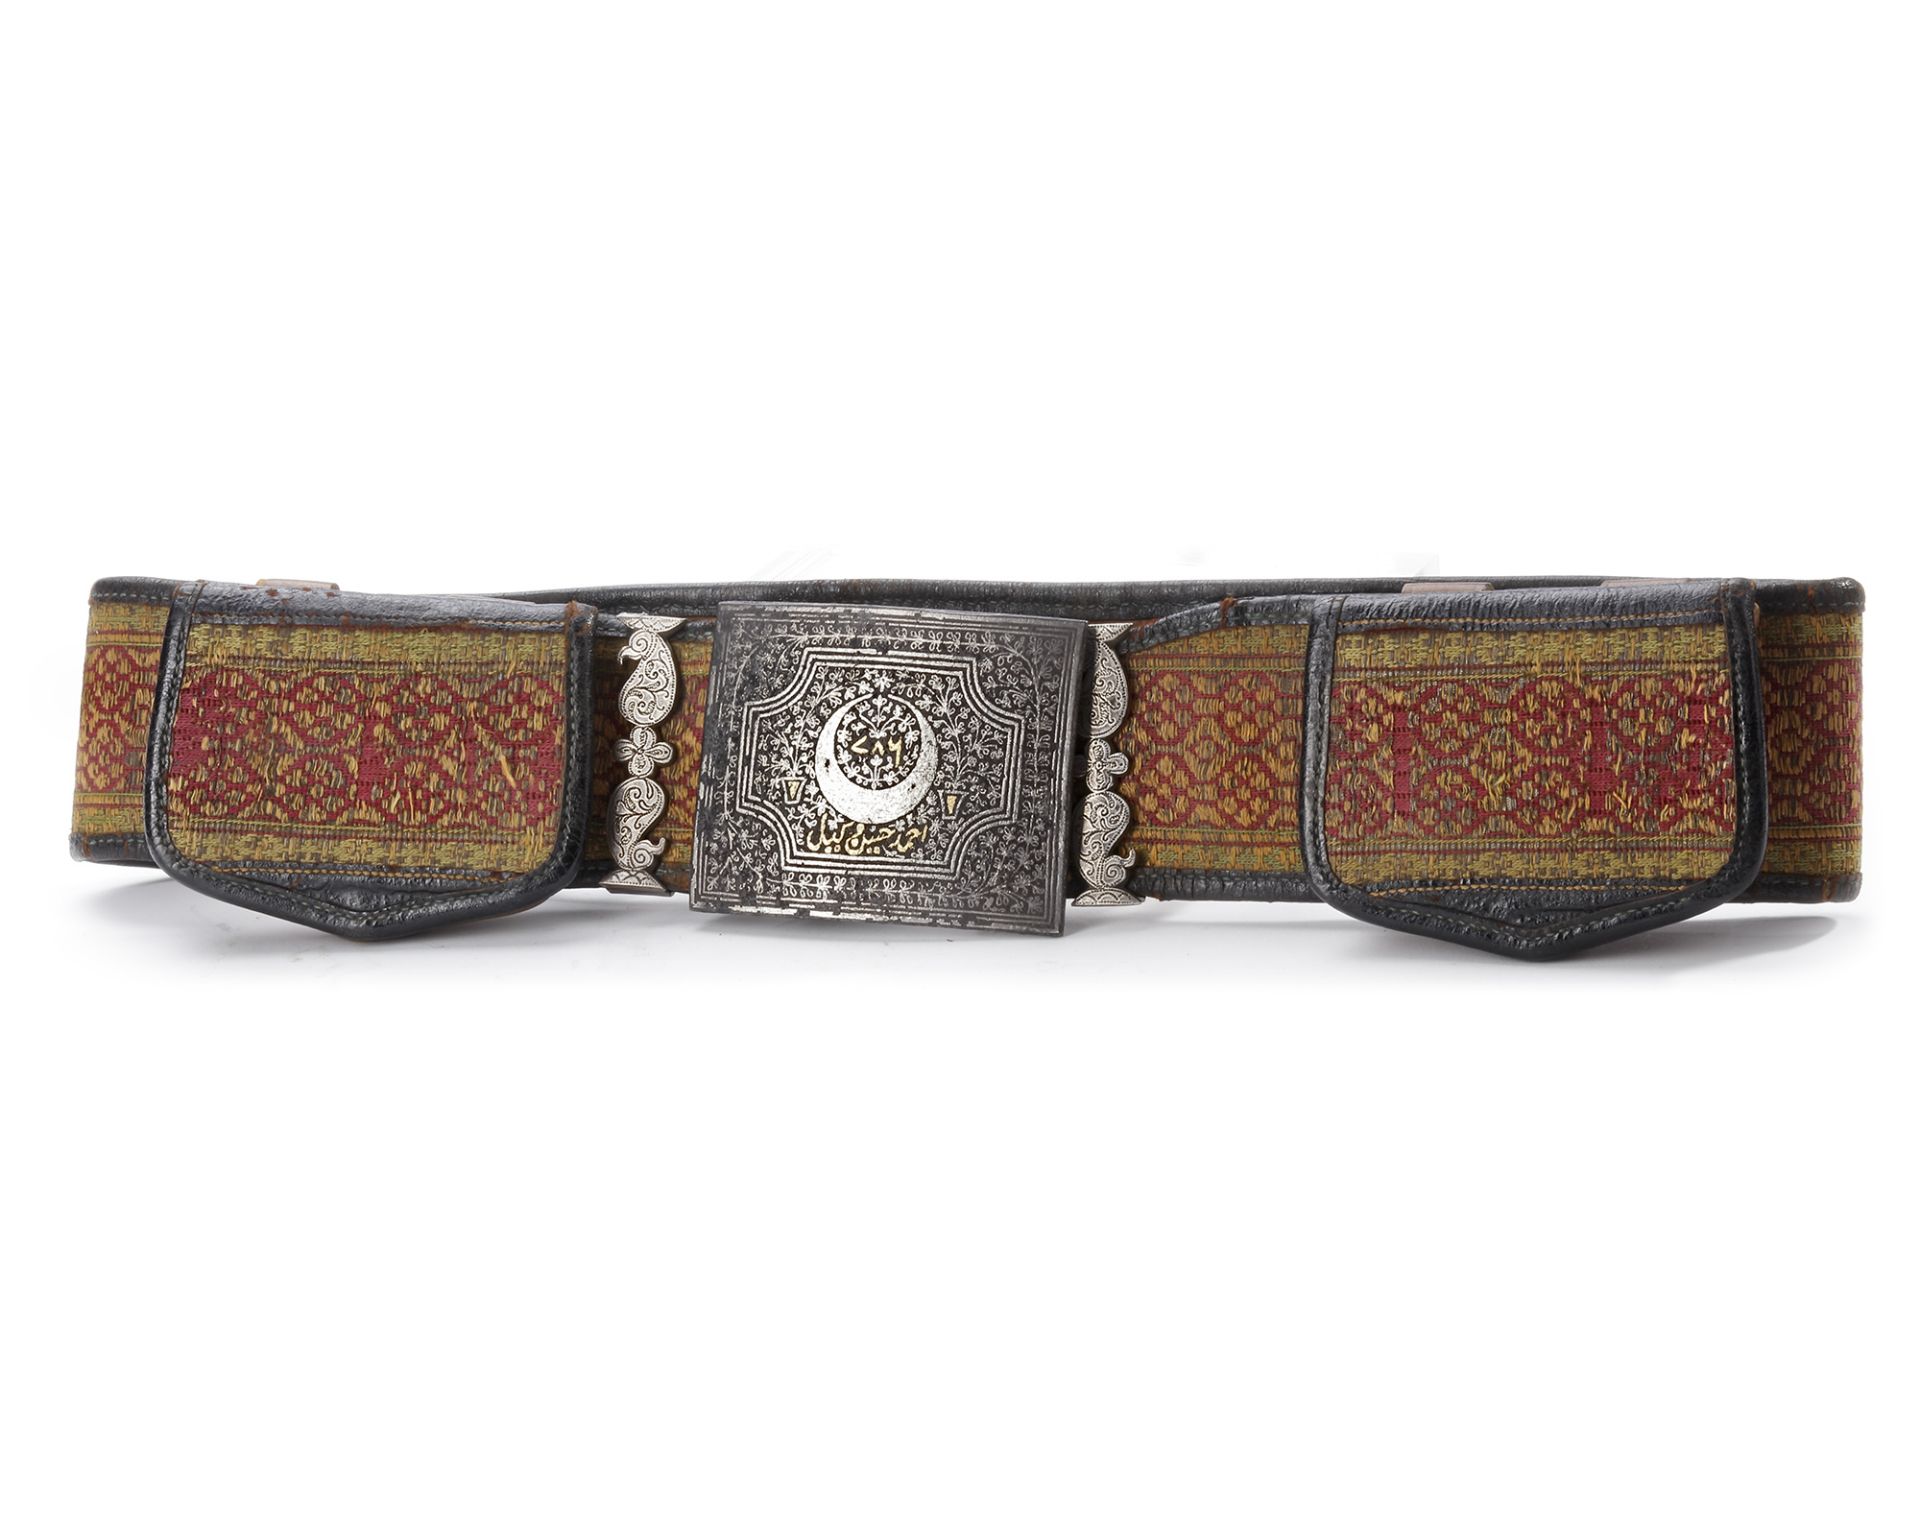 IHRAM BELT, LEATHER, SILK AND LINEN WITH METAL BUCKLE, 19TH CENTURY - Image 2 of 3